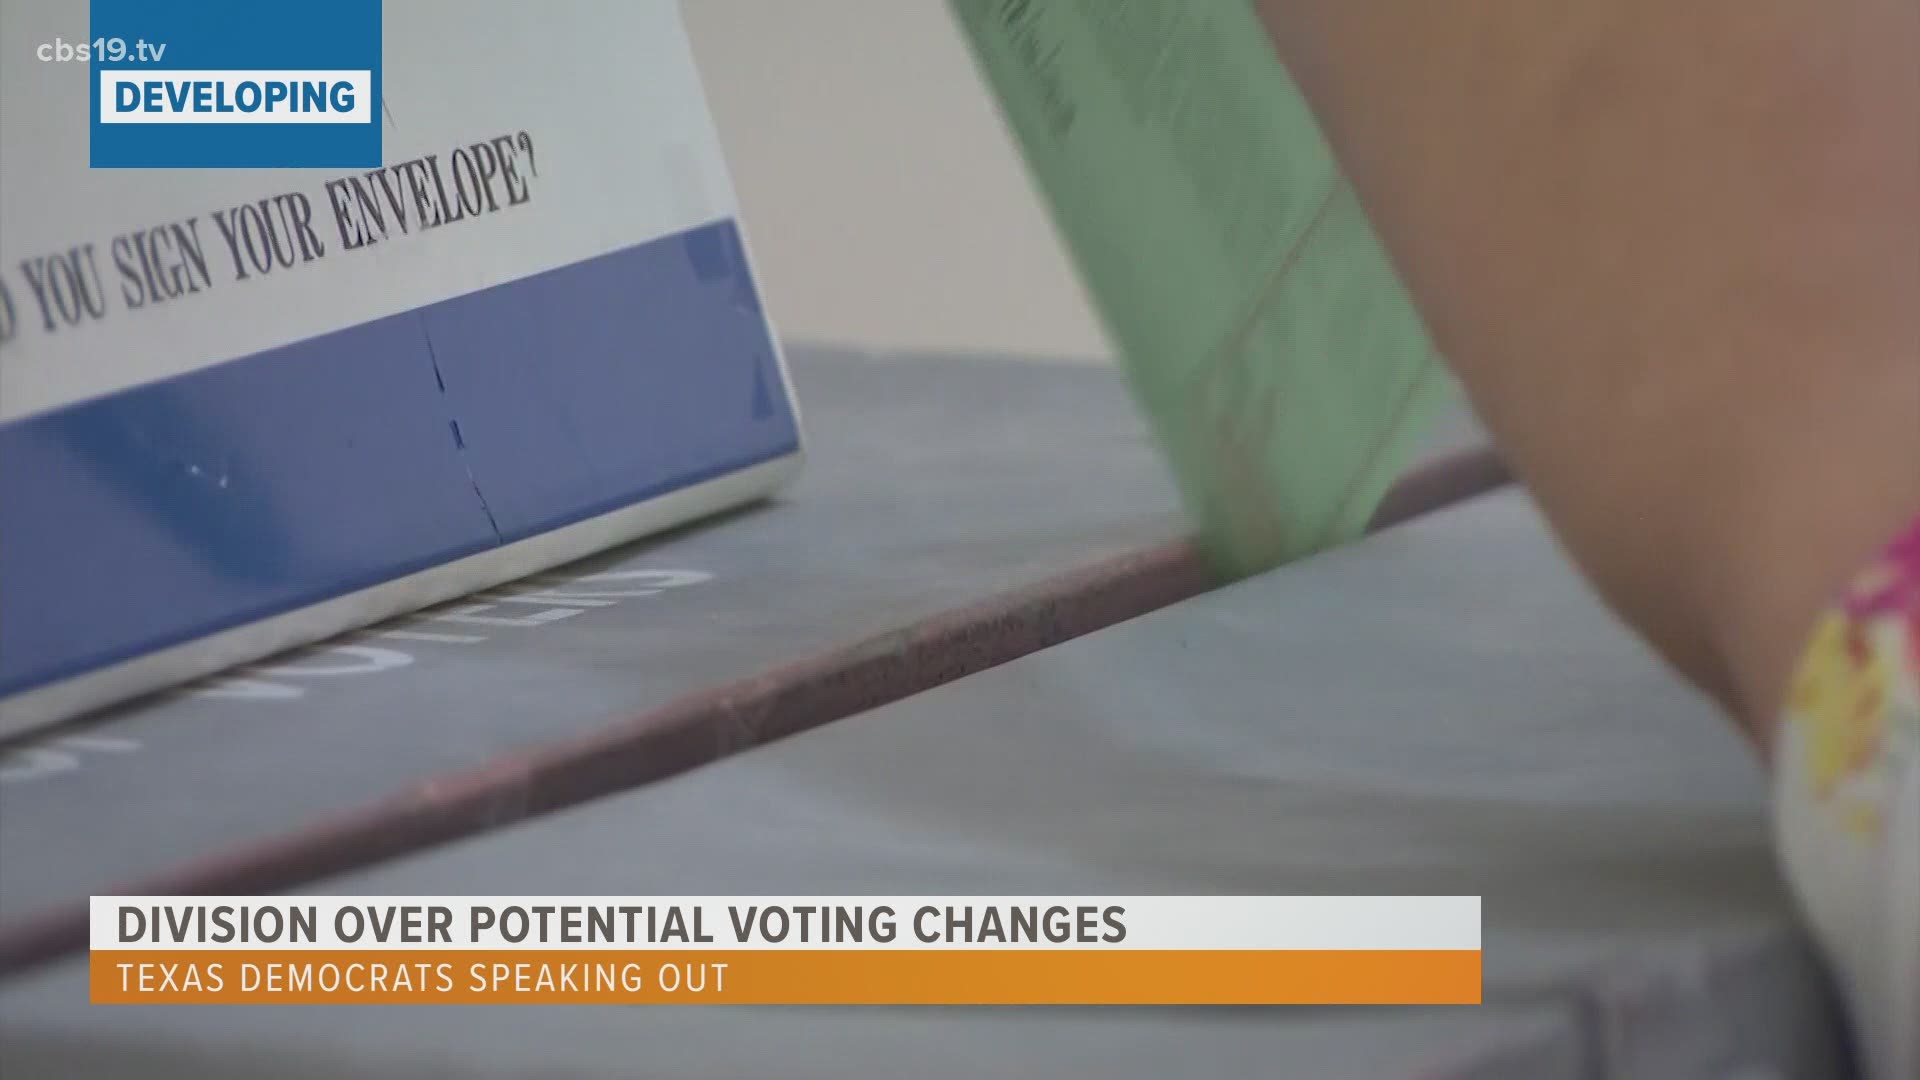 Division over potential voting changes, Texas lawmakers speaking out